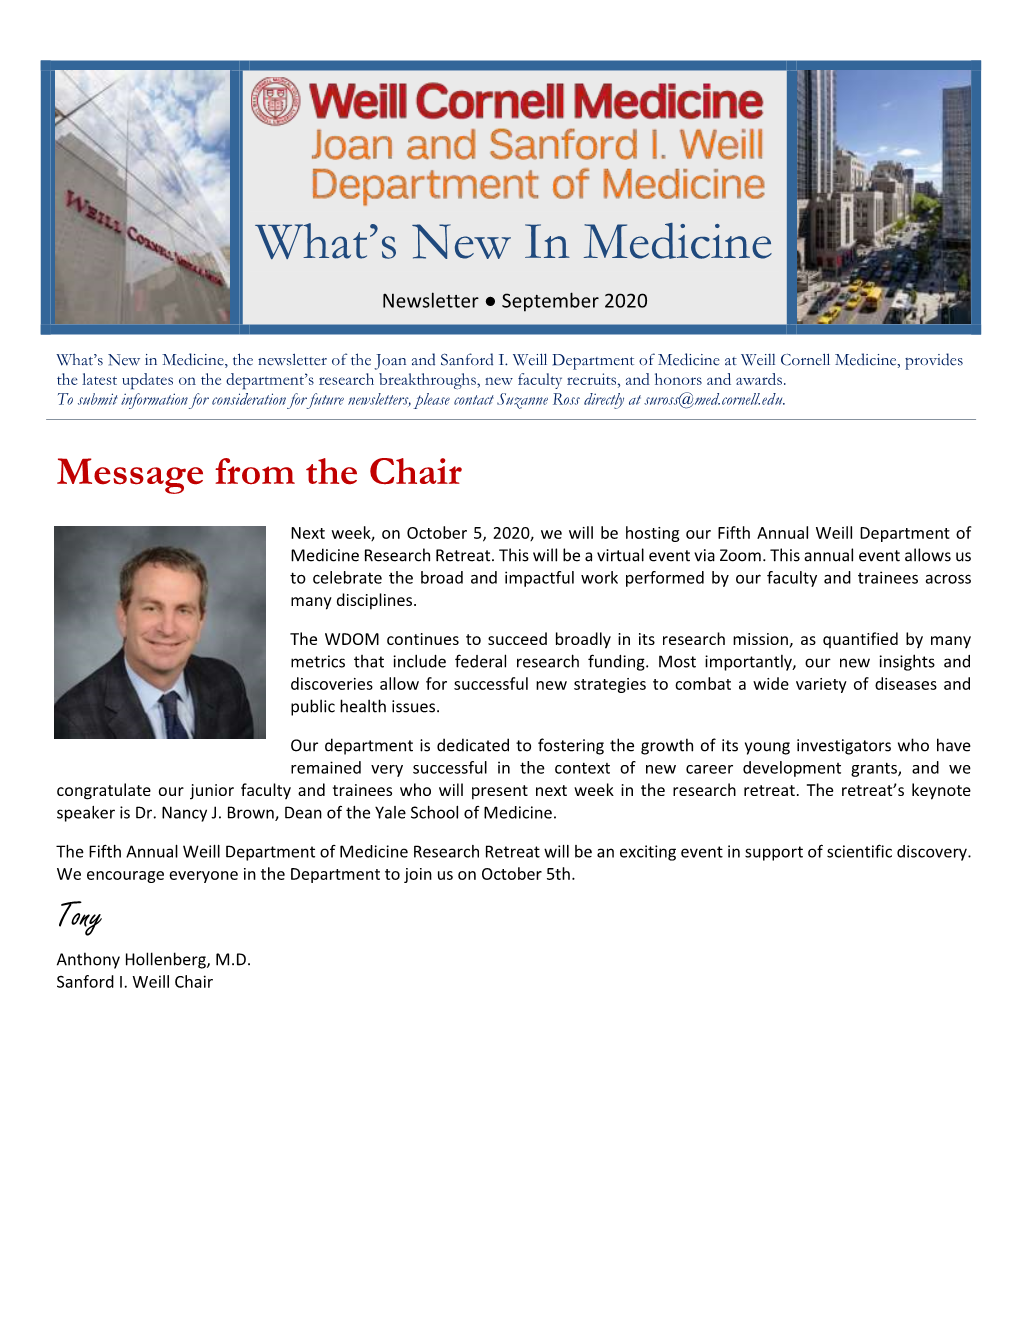 What's New in Medicine